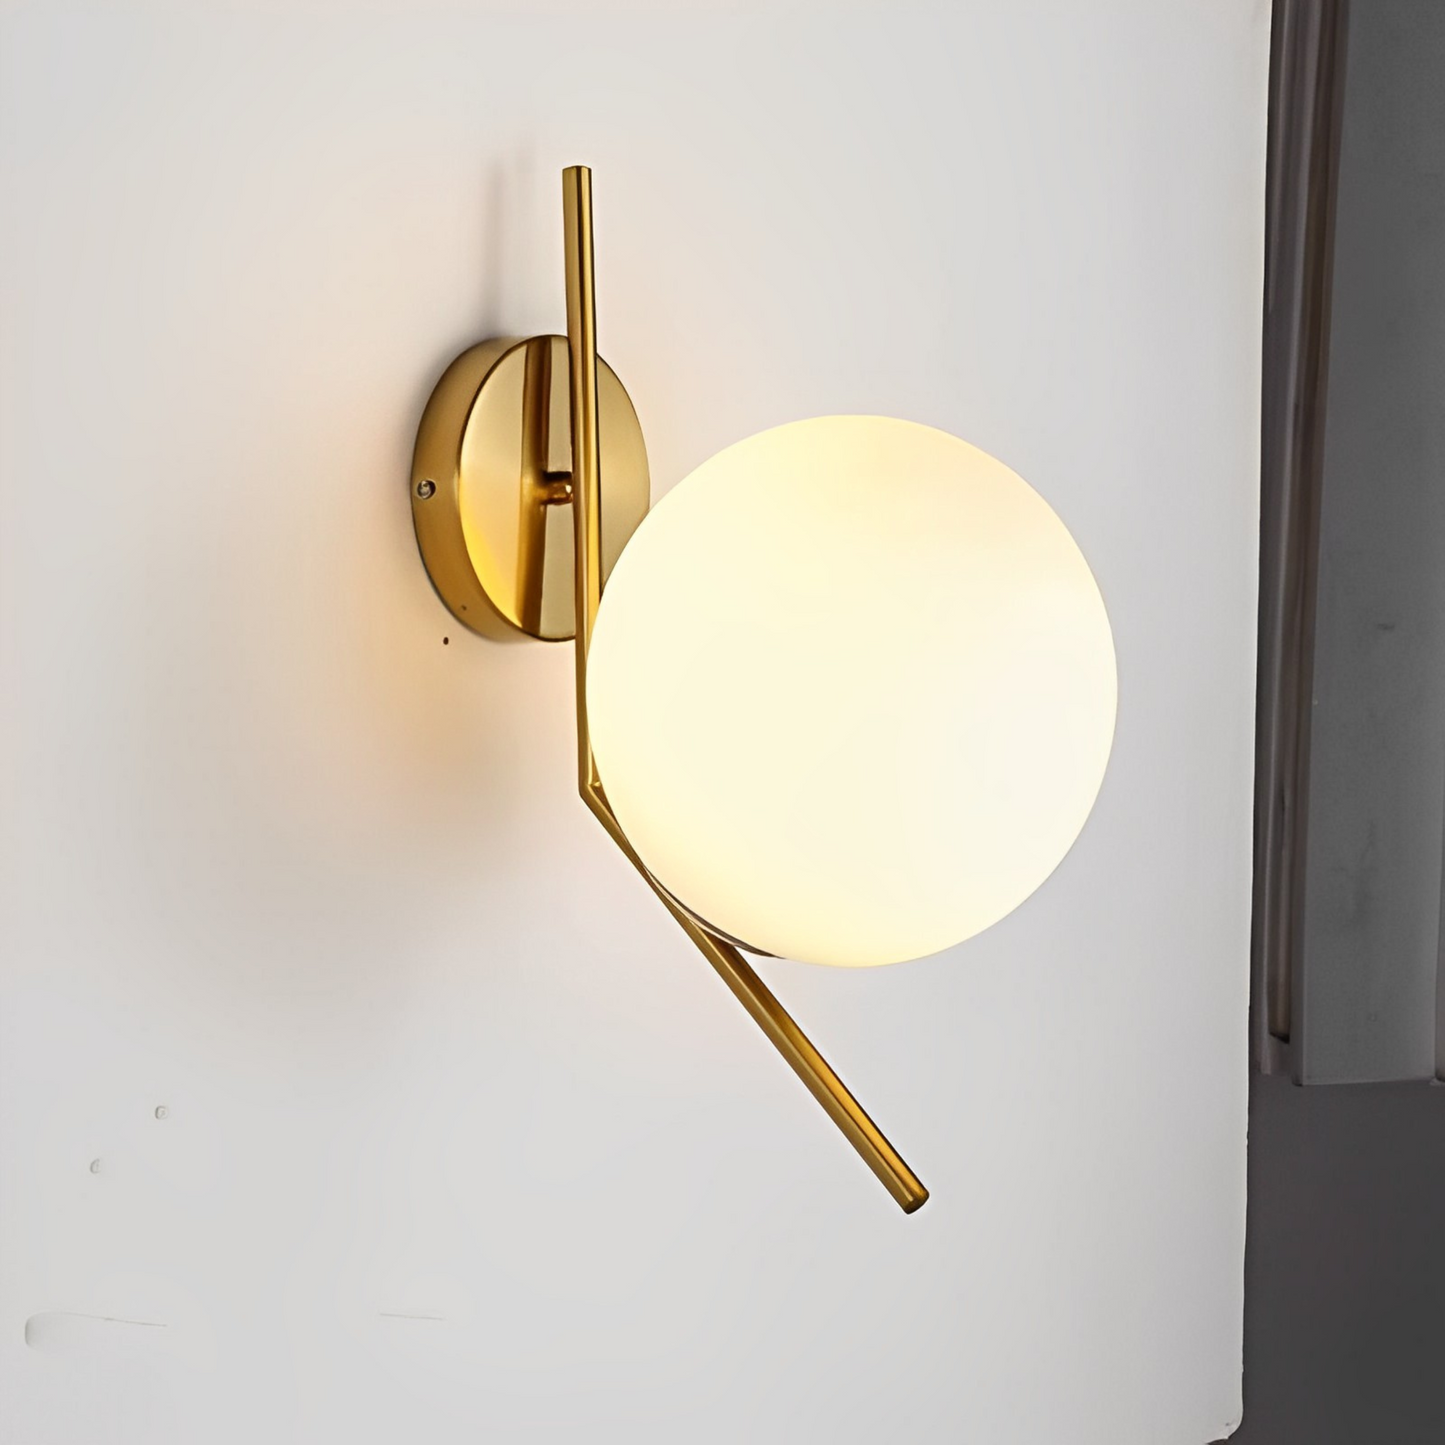 Load image into Gallery viewer, Nordic Metal Wall Light by Gloss (WL-B0042)
